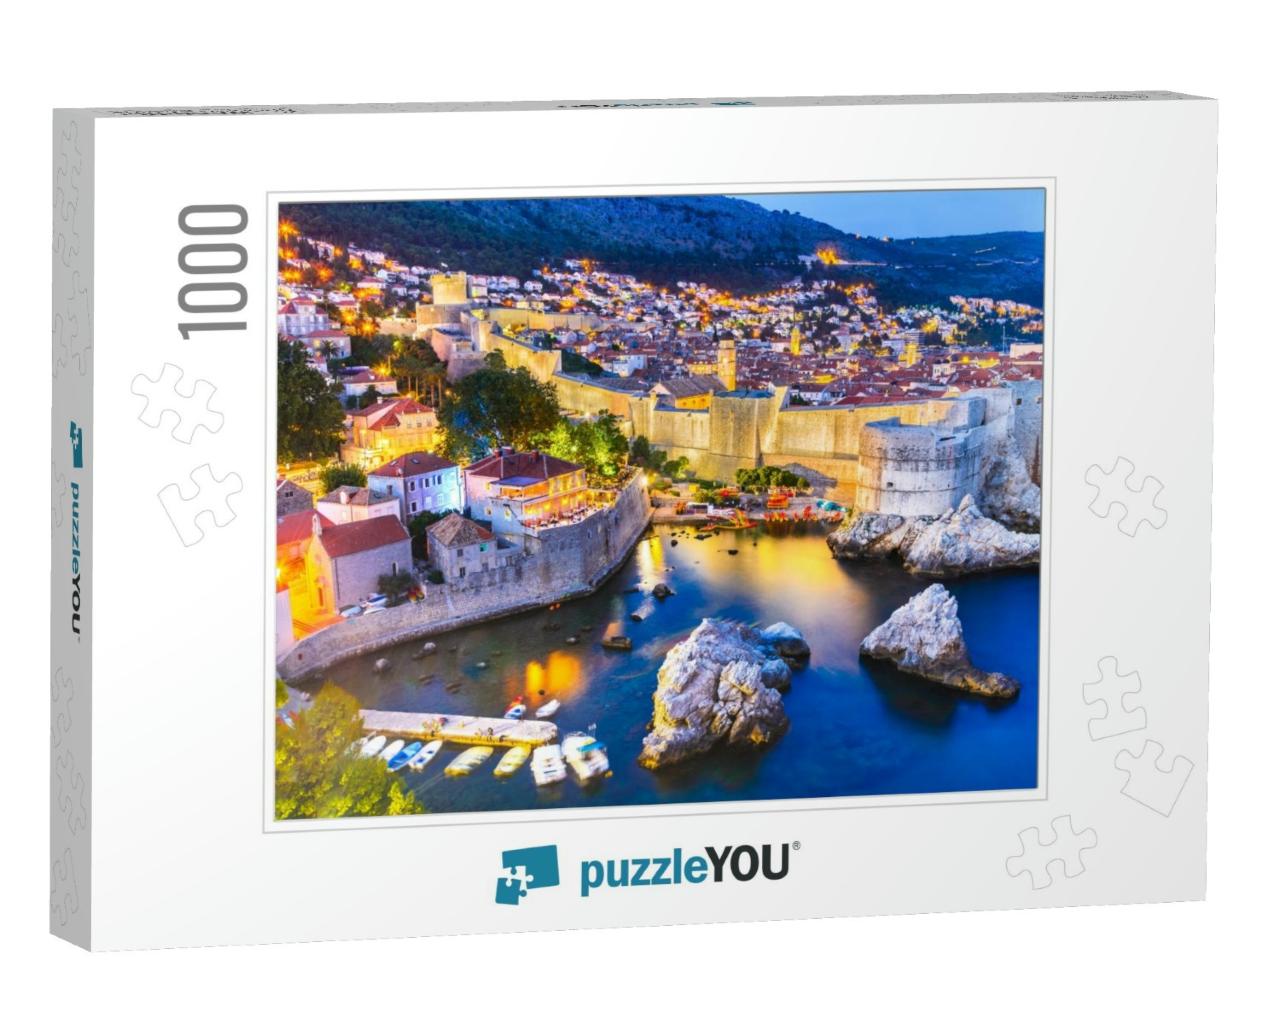 Dubrovnik, Croatia. Spectacular Twilight Picturesque View... Jigsaw Puzzle with 1000 pieces